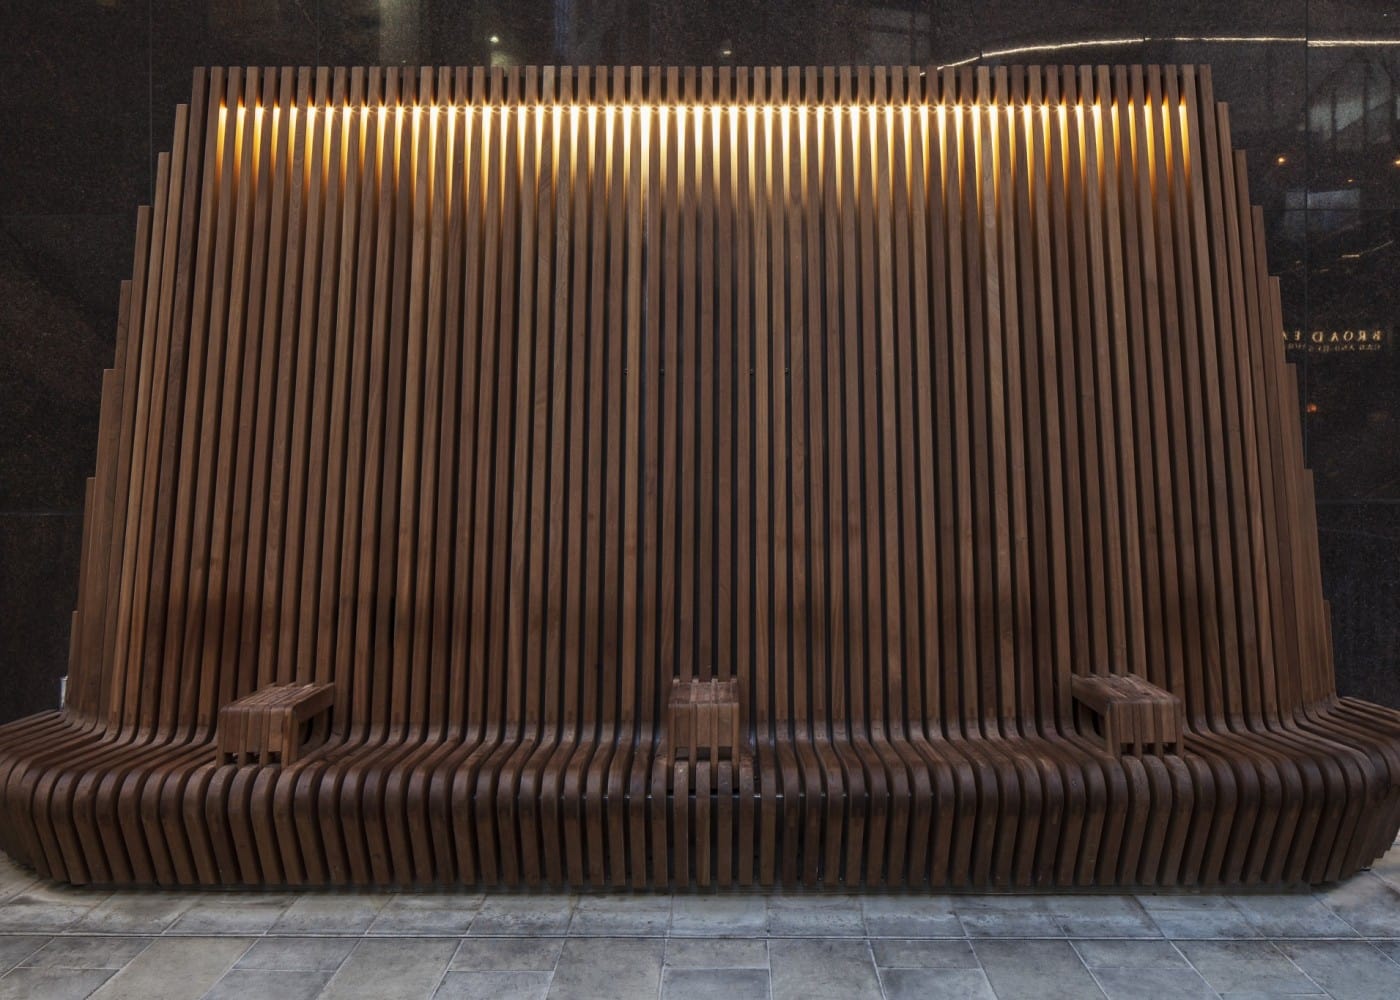 lighting design: tall wooden seating area